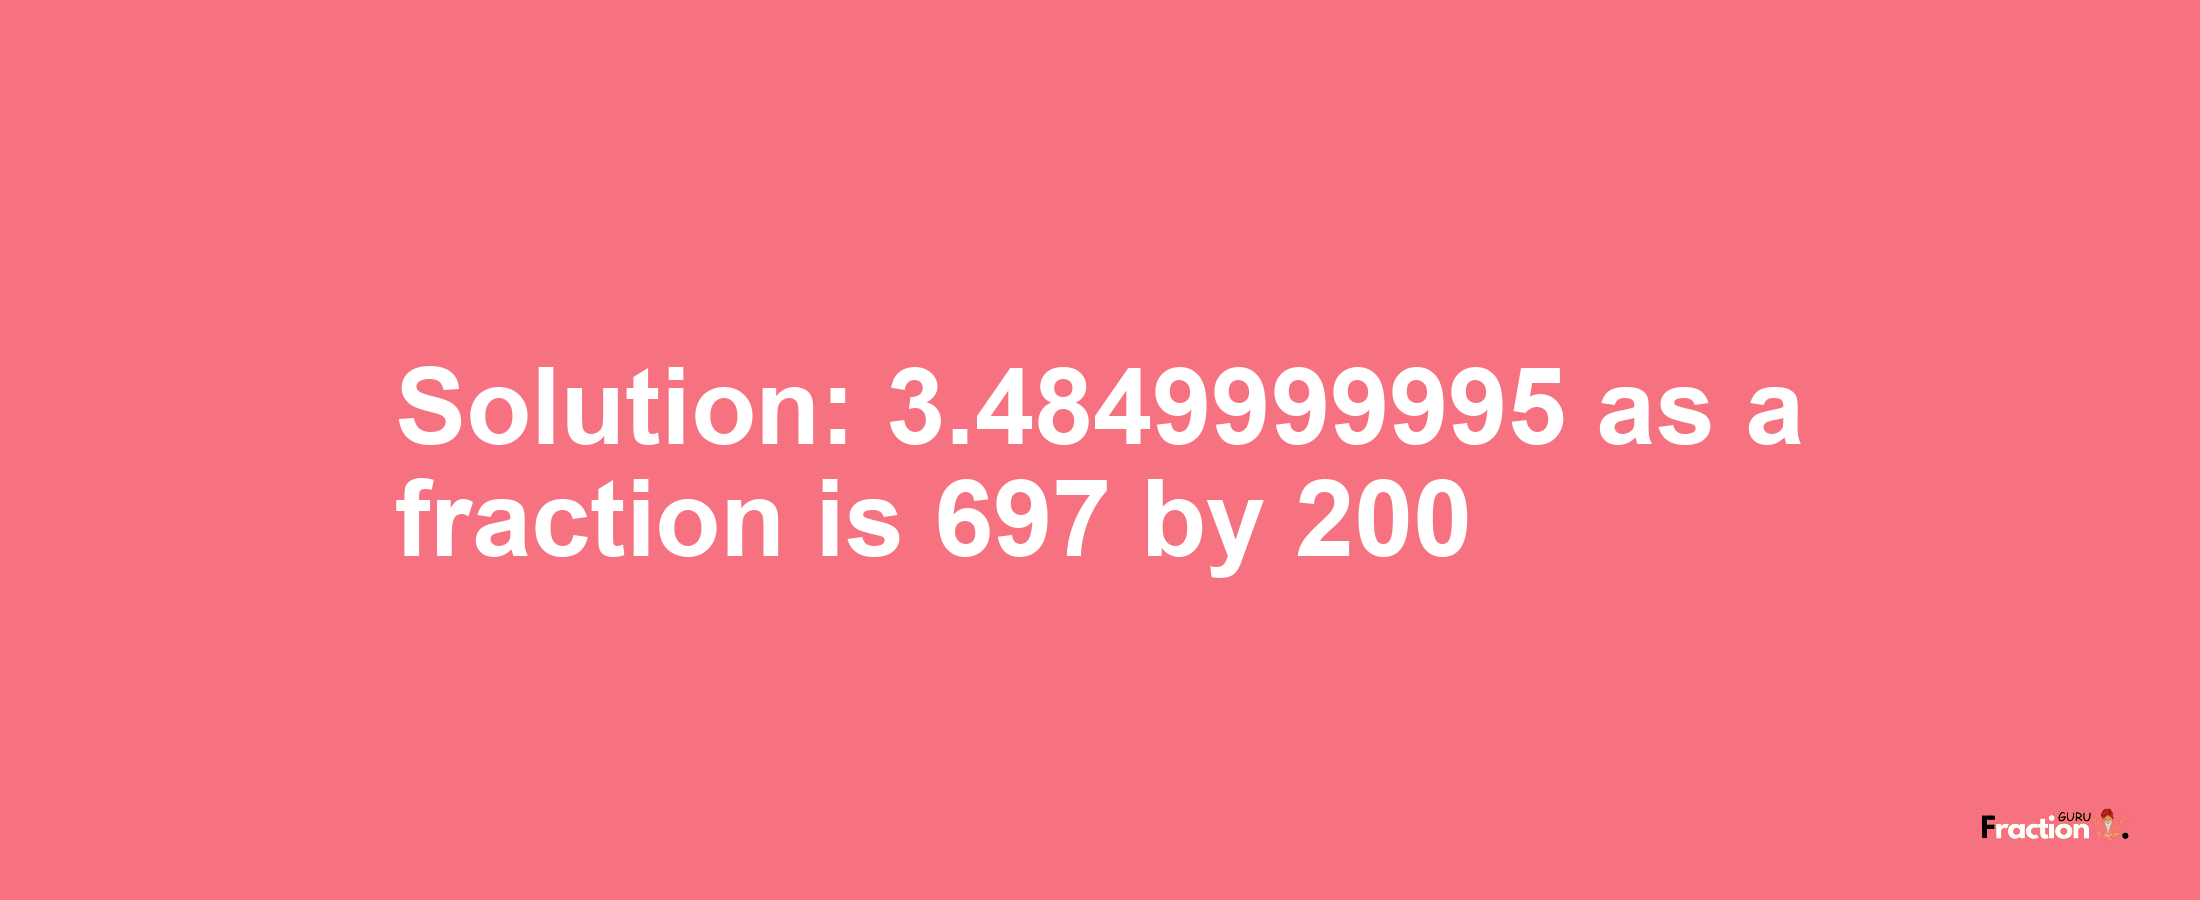 Solution:3.4849999995 as a fraction is 697/200